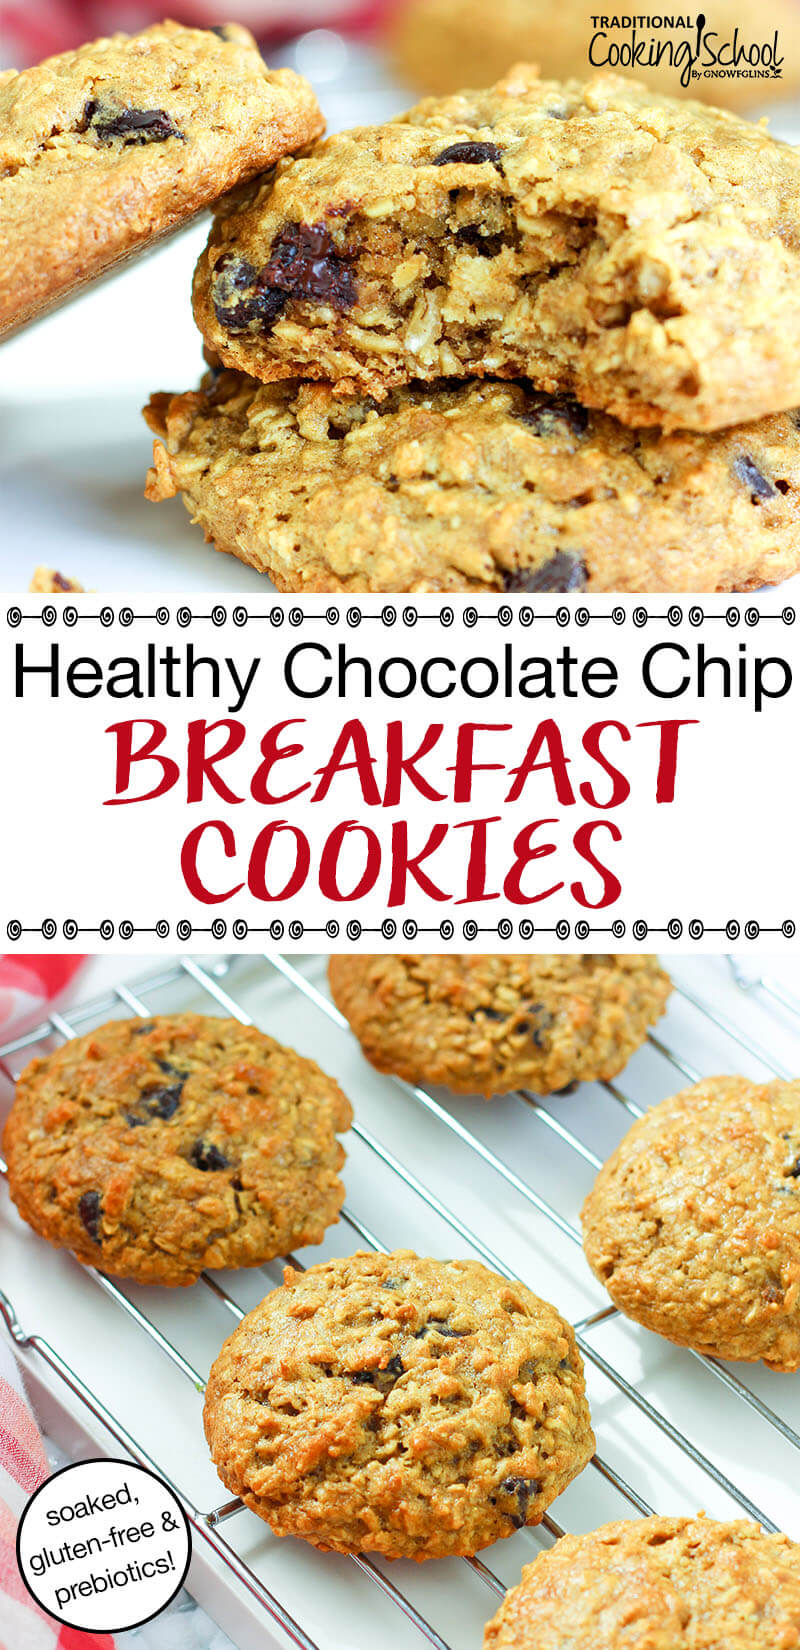 photo collage of oatmeal breakfast cookies, with text overlay: "Healthy Chocolate Chip Breakfast Cookies (soaked, gluten-free, prebiotics!)"